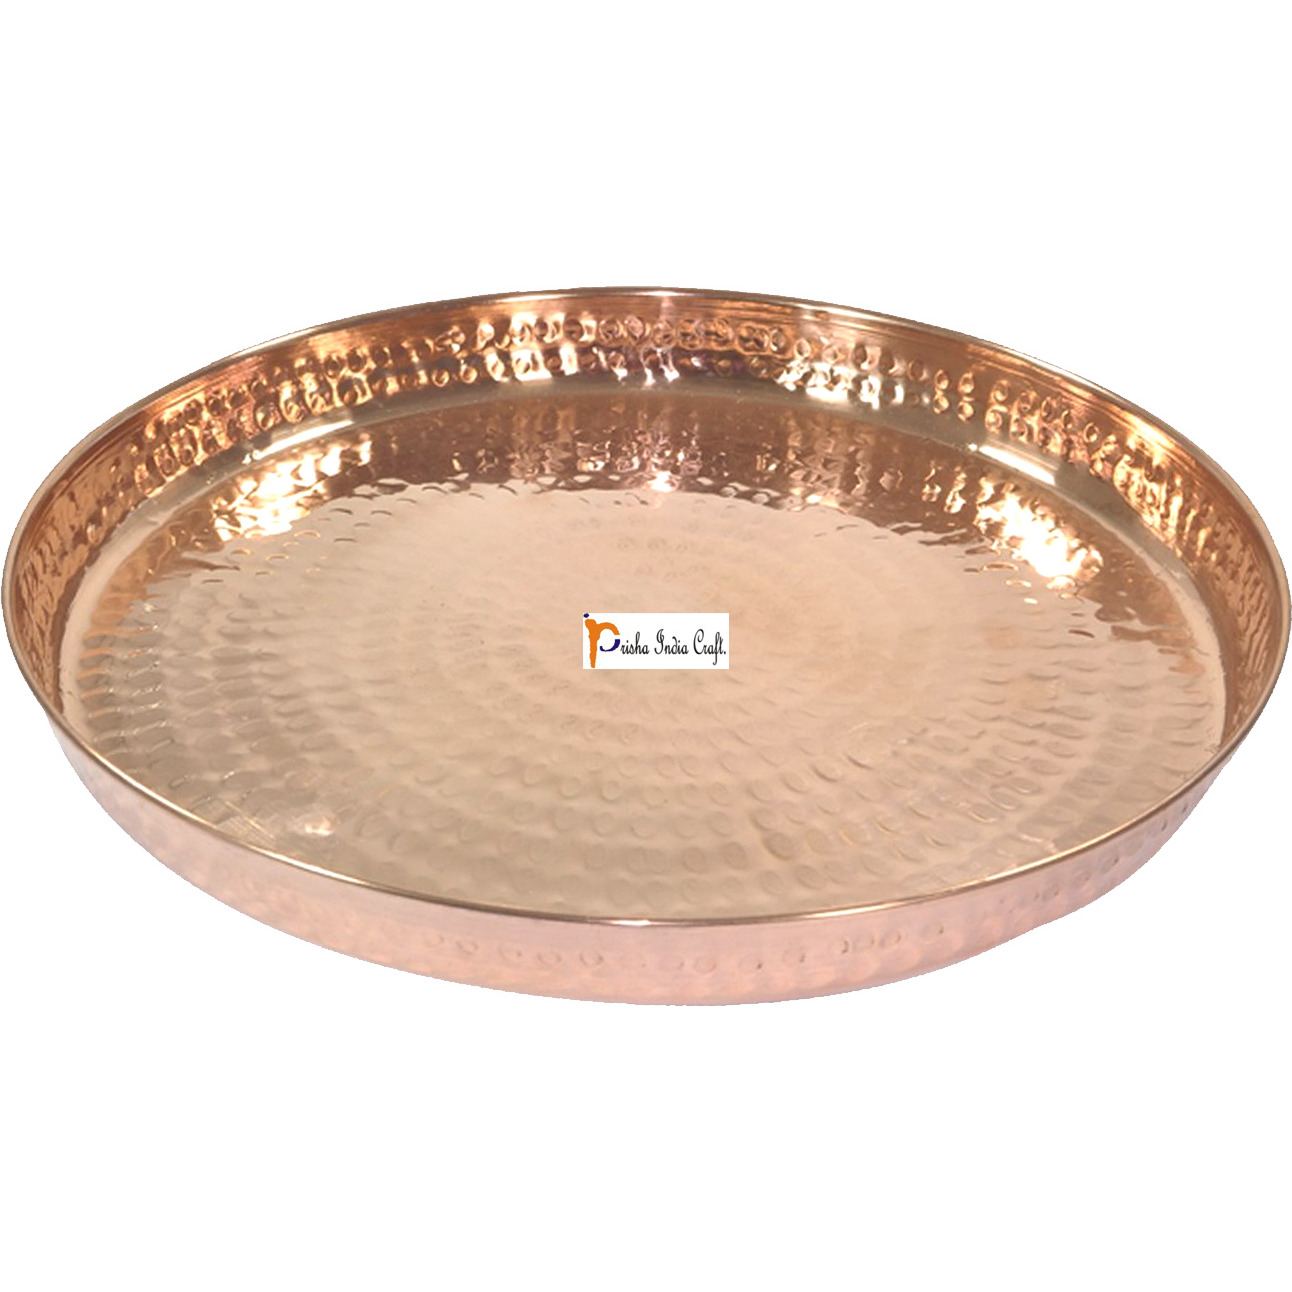 Set of 4 Prisha India Craft B. Dinnerware Pure Copper Thali Set Dia 12  Traditional Dinner Set of Plate, Bowl, Spoons, Glass with Napkin ring and Coaster - Christmas Gift